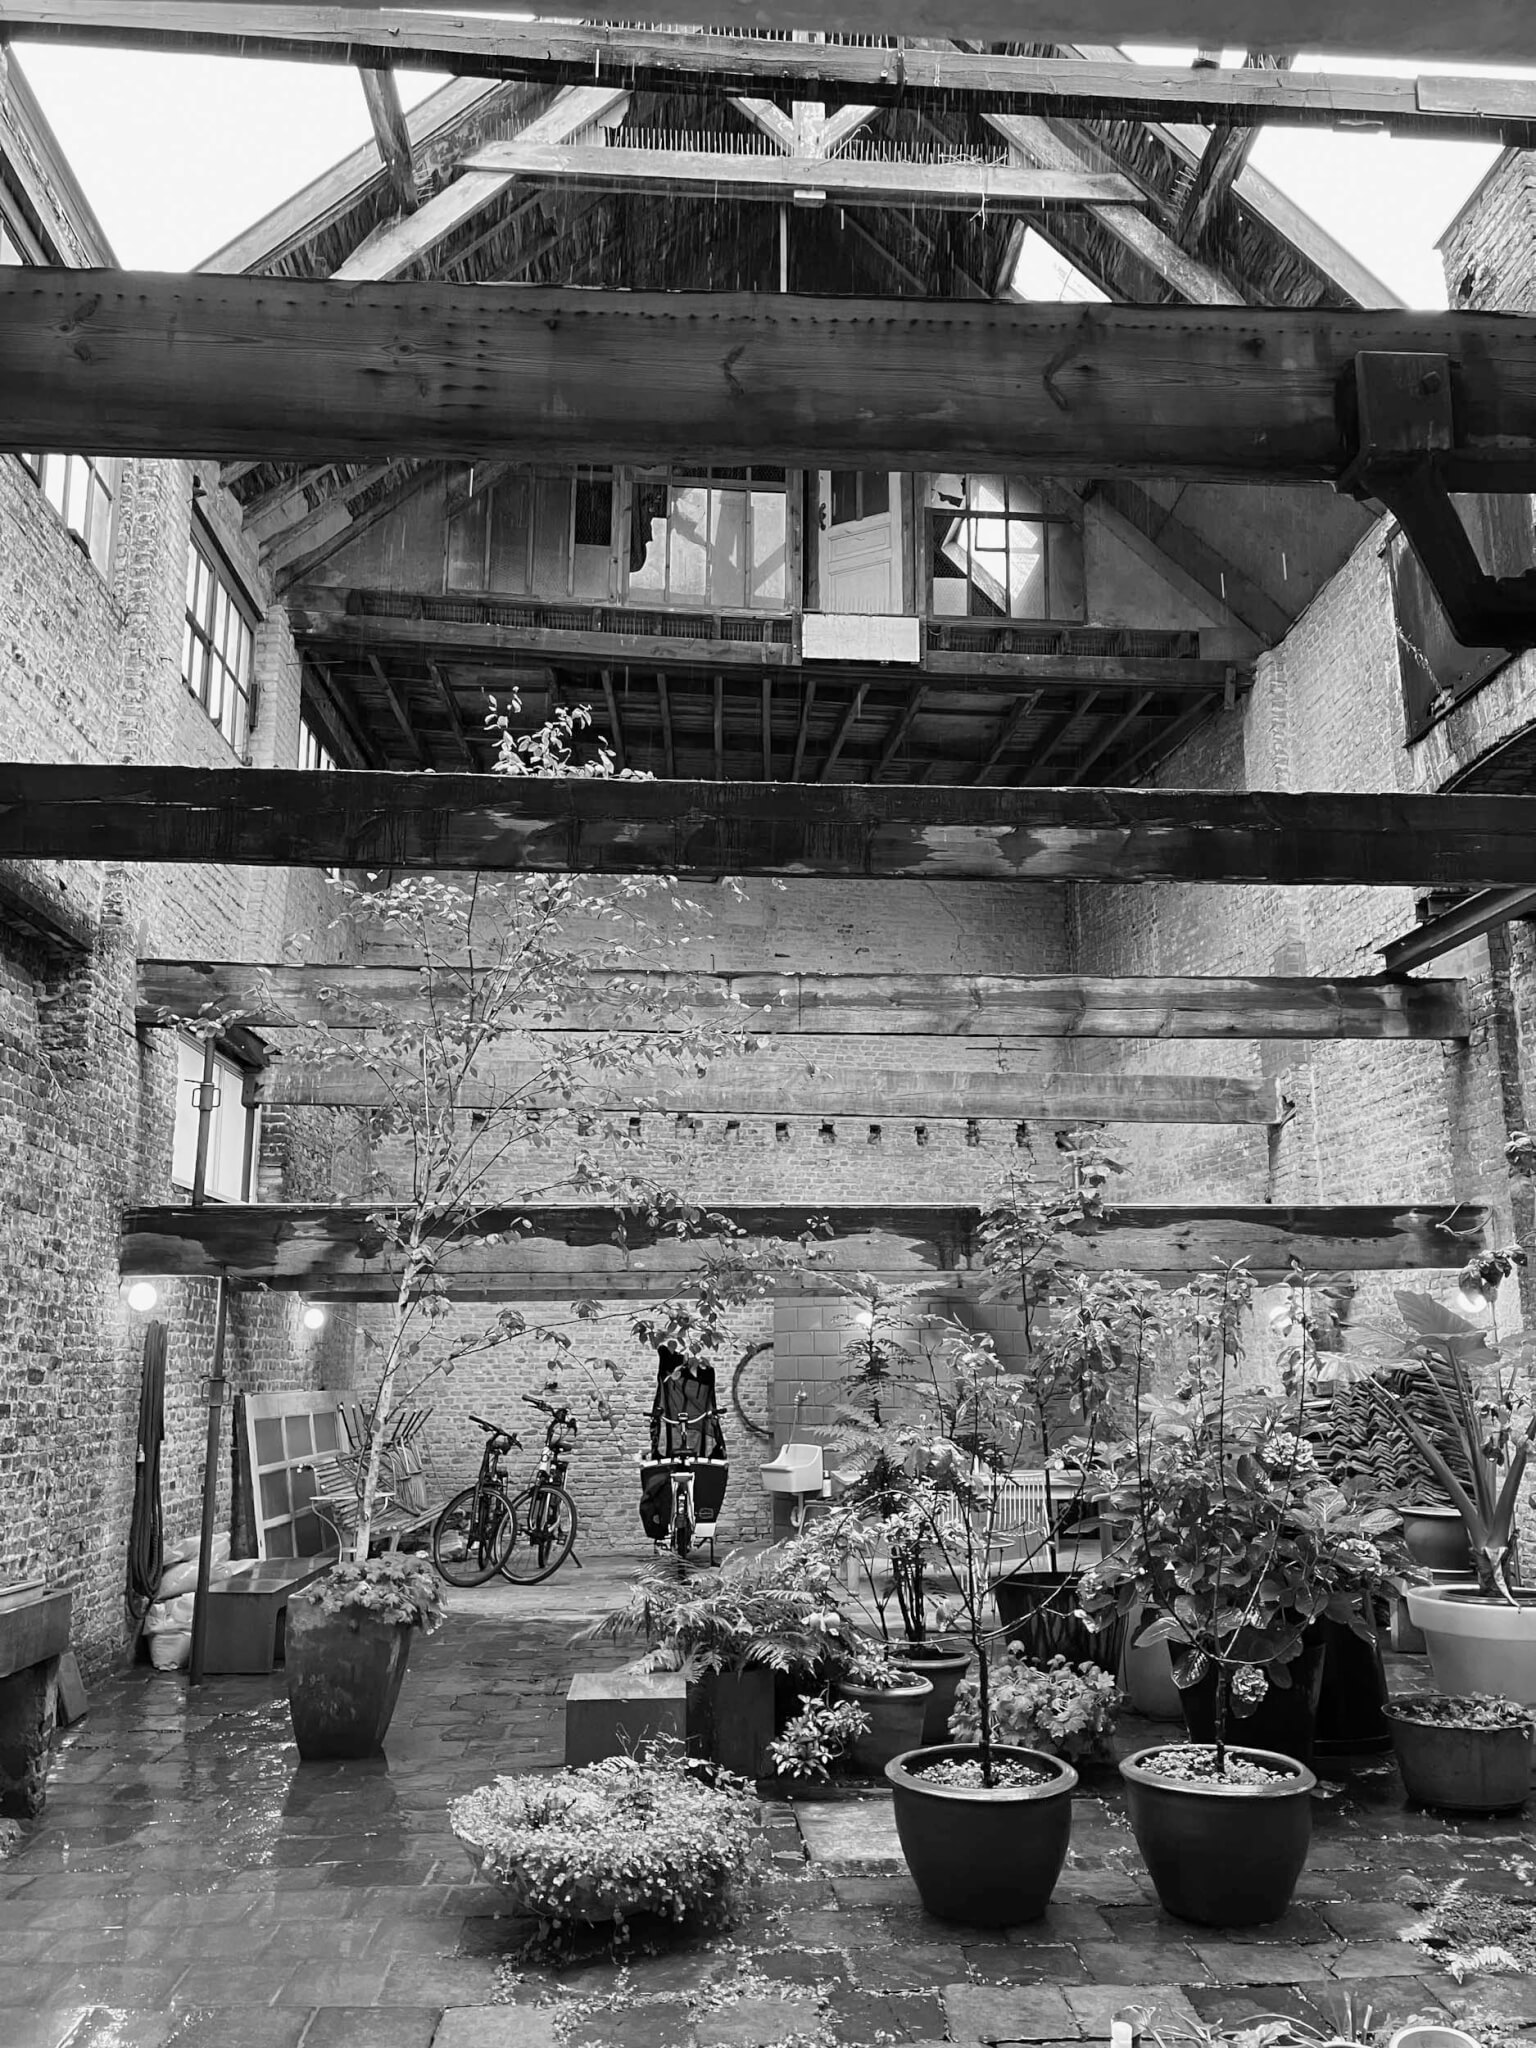 black and white photo of gardens in shell of old building